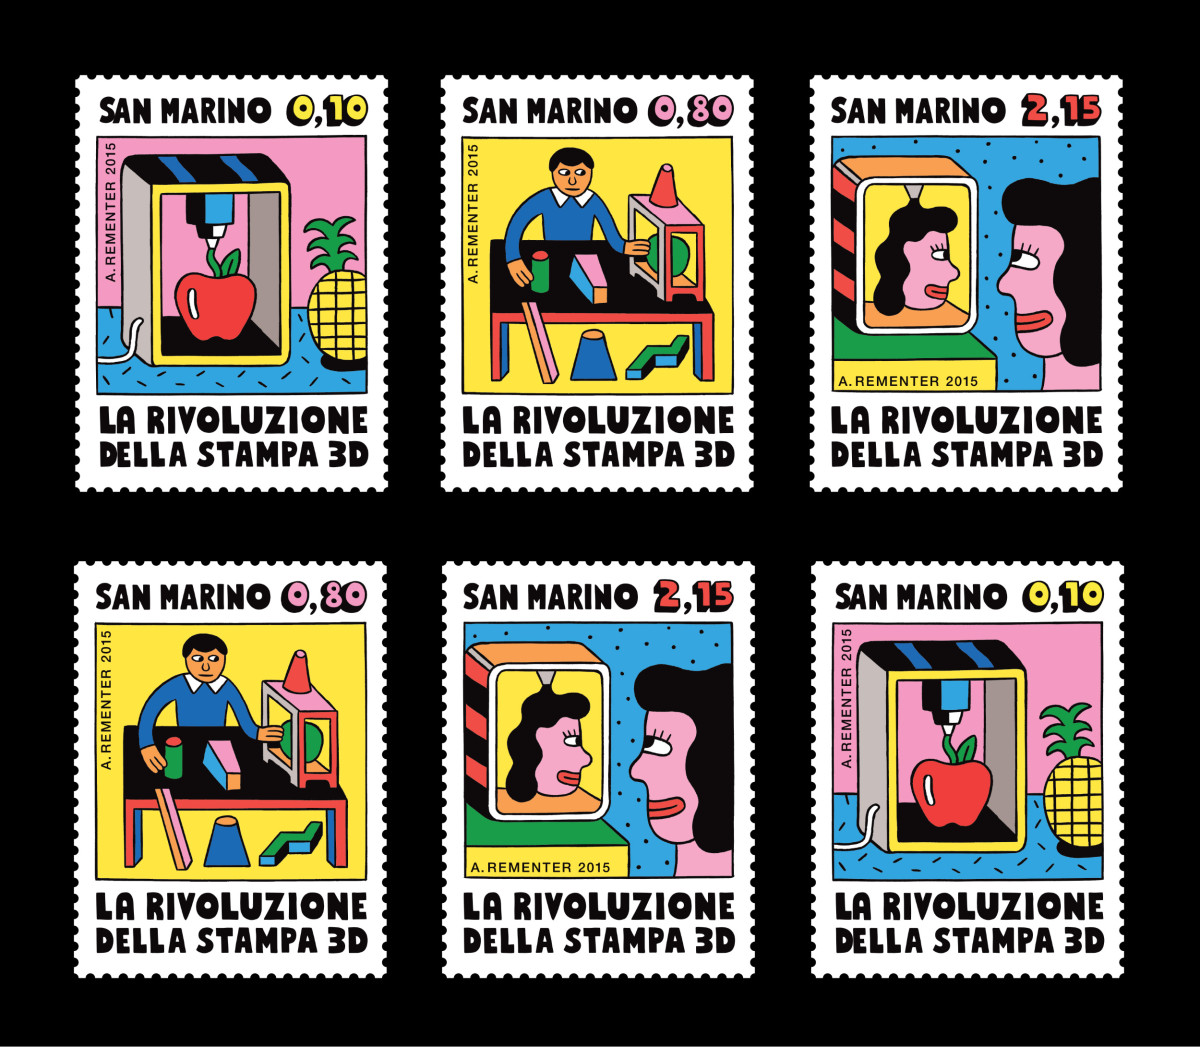 Andy Rementer / Commercial Work / San Marino Stamps&lt;span class=&quot;slide_numbers&quot;&gt;&lt;span class=&quot;slide_number&quot;&gt;4&lt;/span&gt;/7&lt;/span&gt;